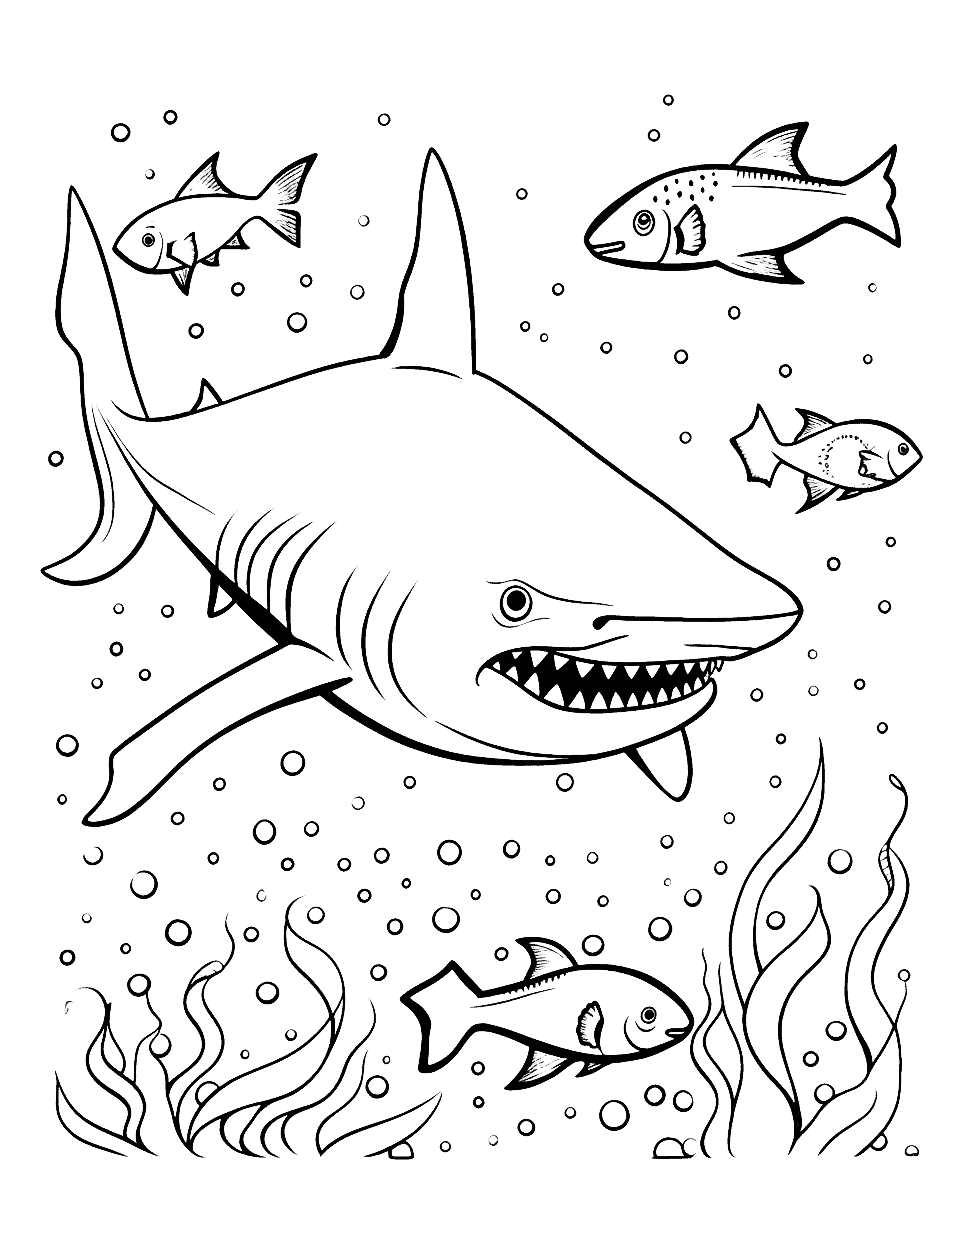 Whale Shark and Friends Coloring Page - A large, friendly whale shark swimming alongside various species of fish.